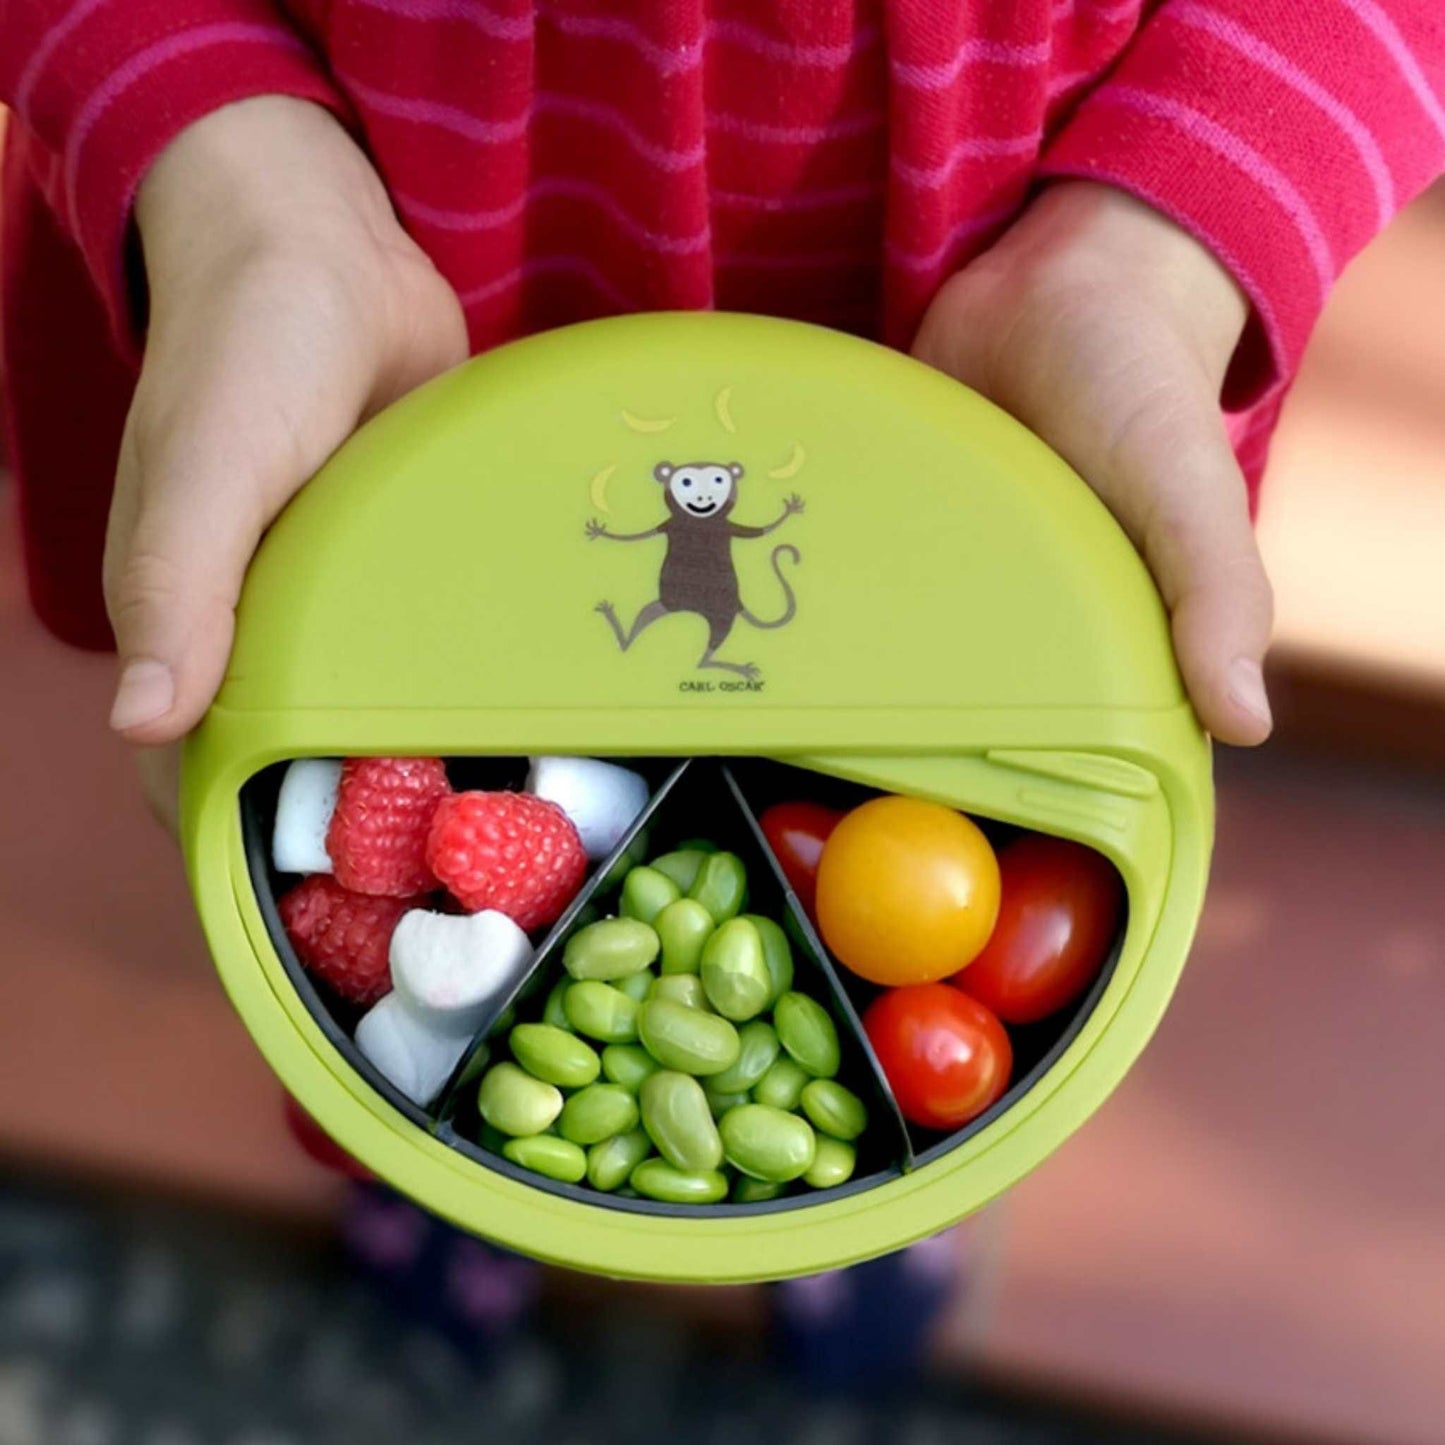 Carl Oscar Lunch Boxes & Totes Green SnackDISC Children's Lunchbox - Kids Bento Snack Box